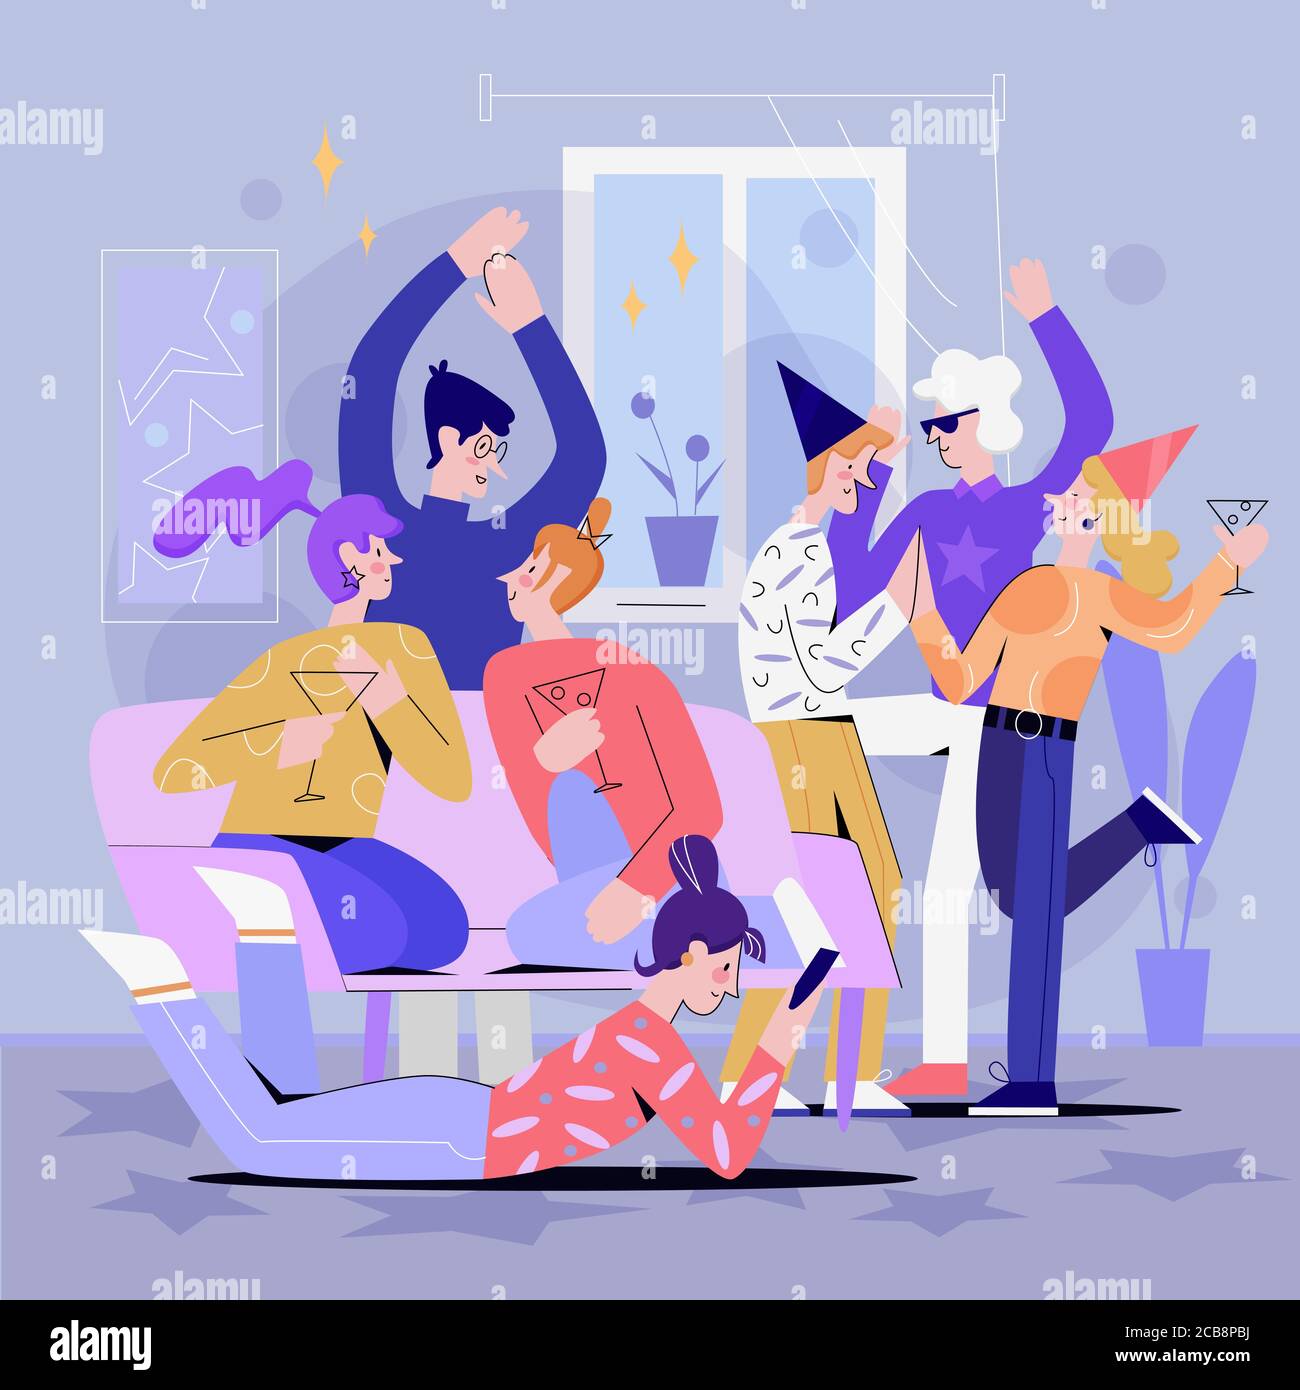 Party at home vector illustration. Soiree, holiday, Birthday celebration, entertainment, home discotheque. Male and female guests, crowd people student friends resting together. Stock Vector